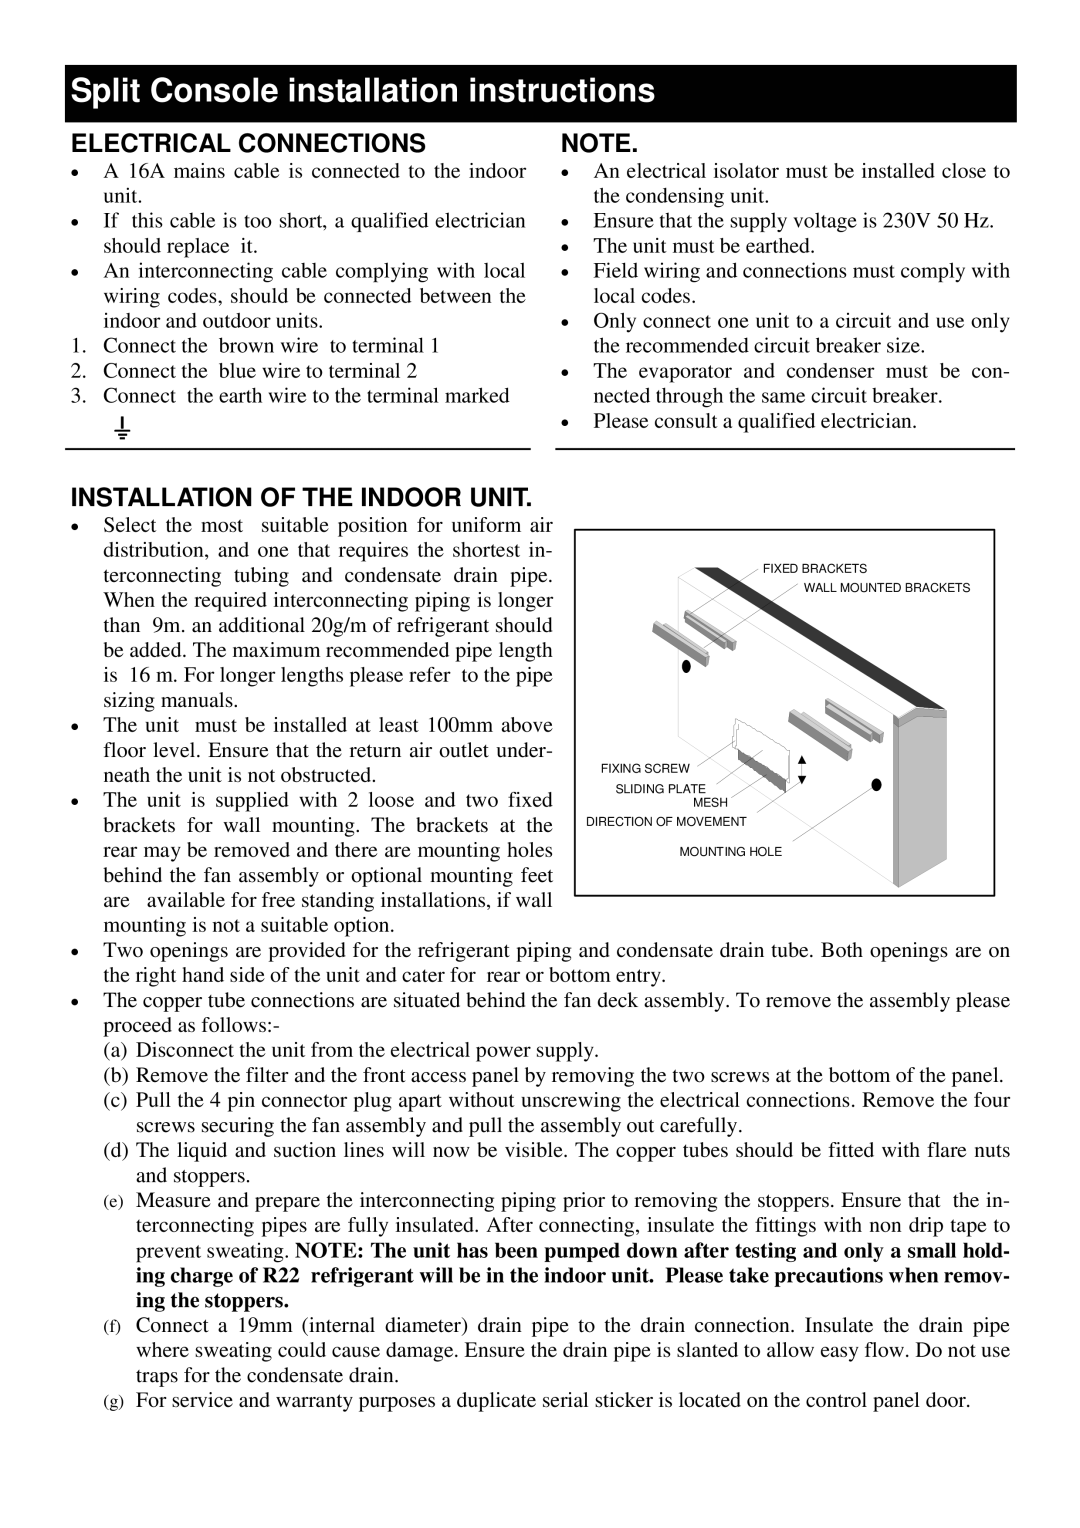 Defy Appliances Part Number 059 044 Split Console installation instructions, Electrical Connections 